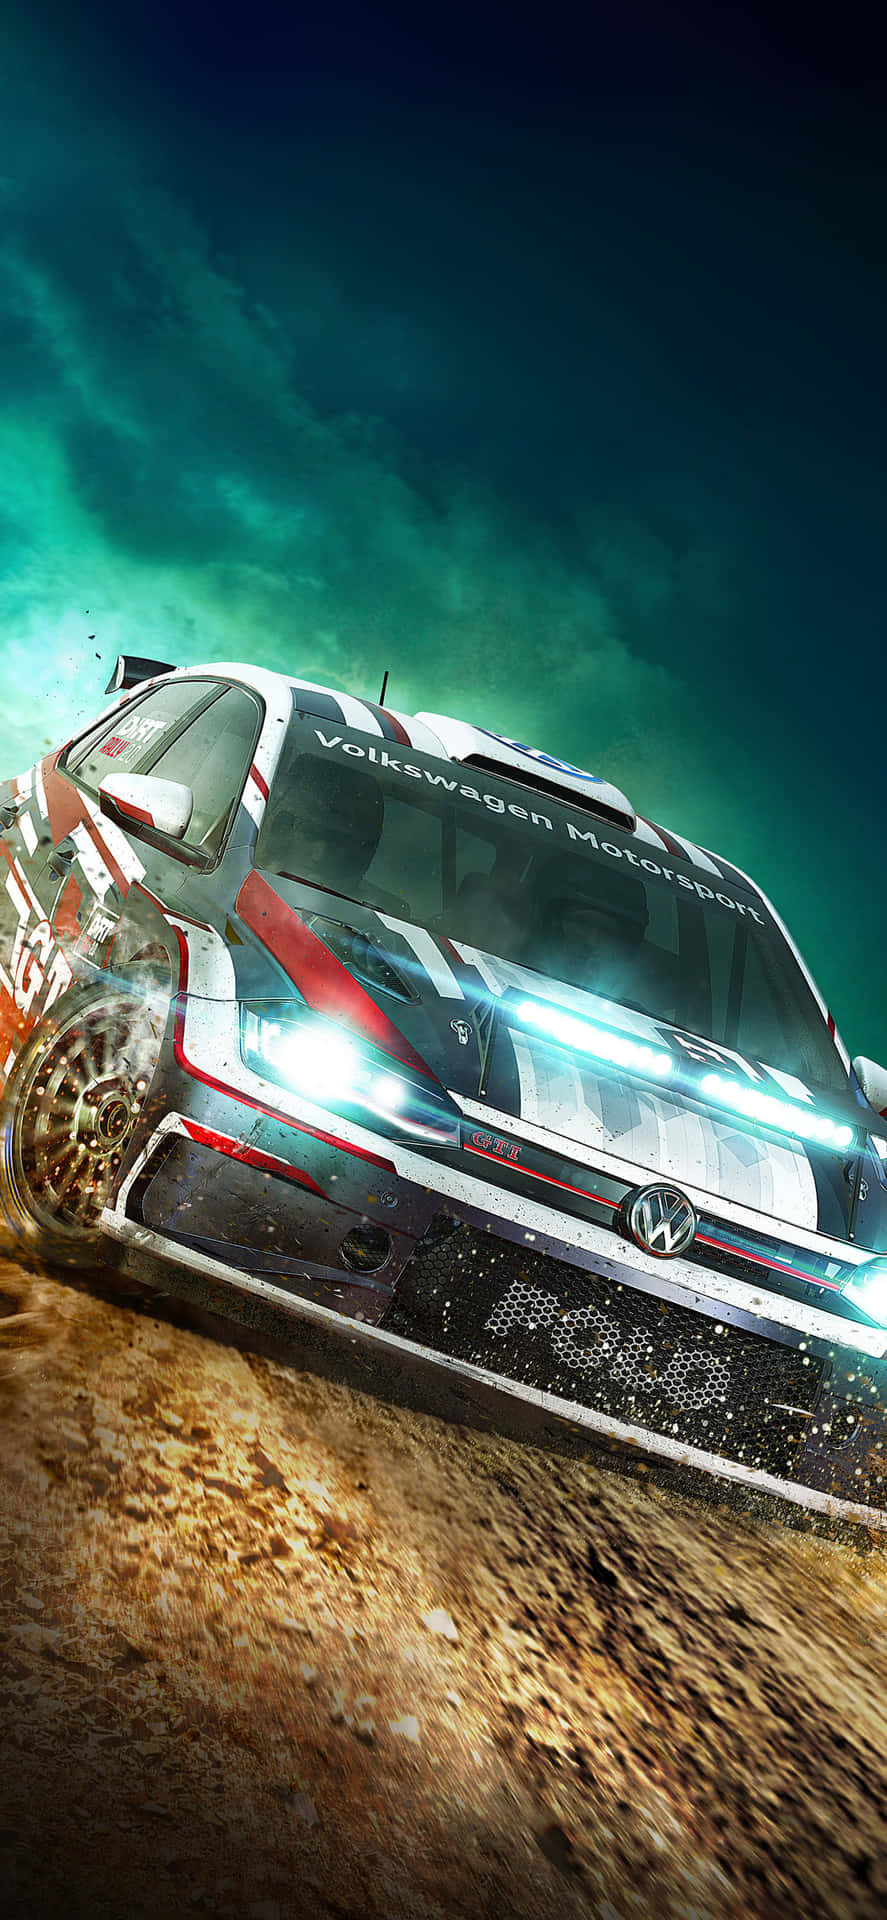 Feel the rush of being in the drivers seat with Dirt Rally on iPhone Xs